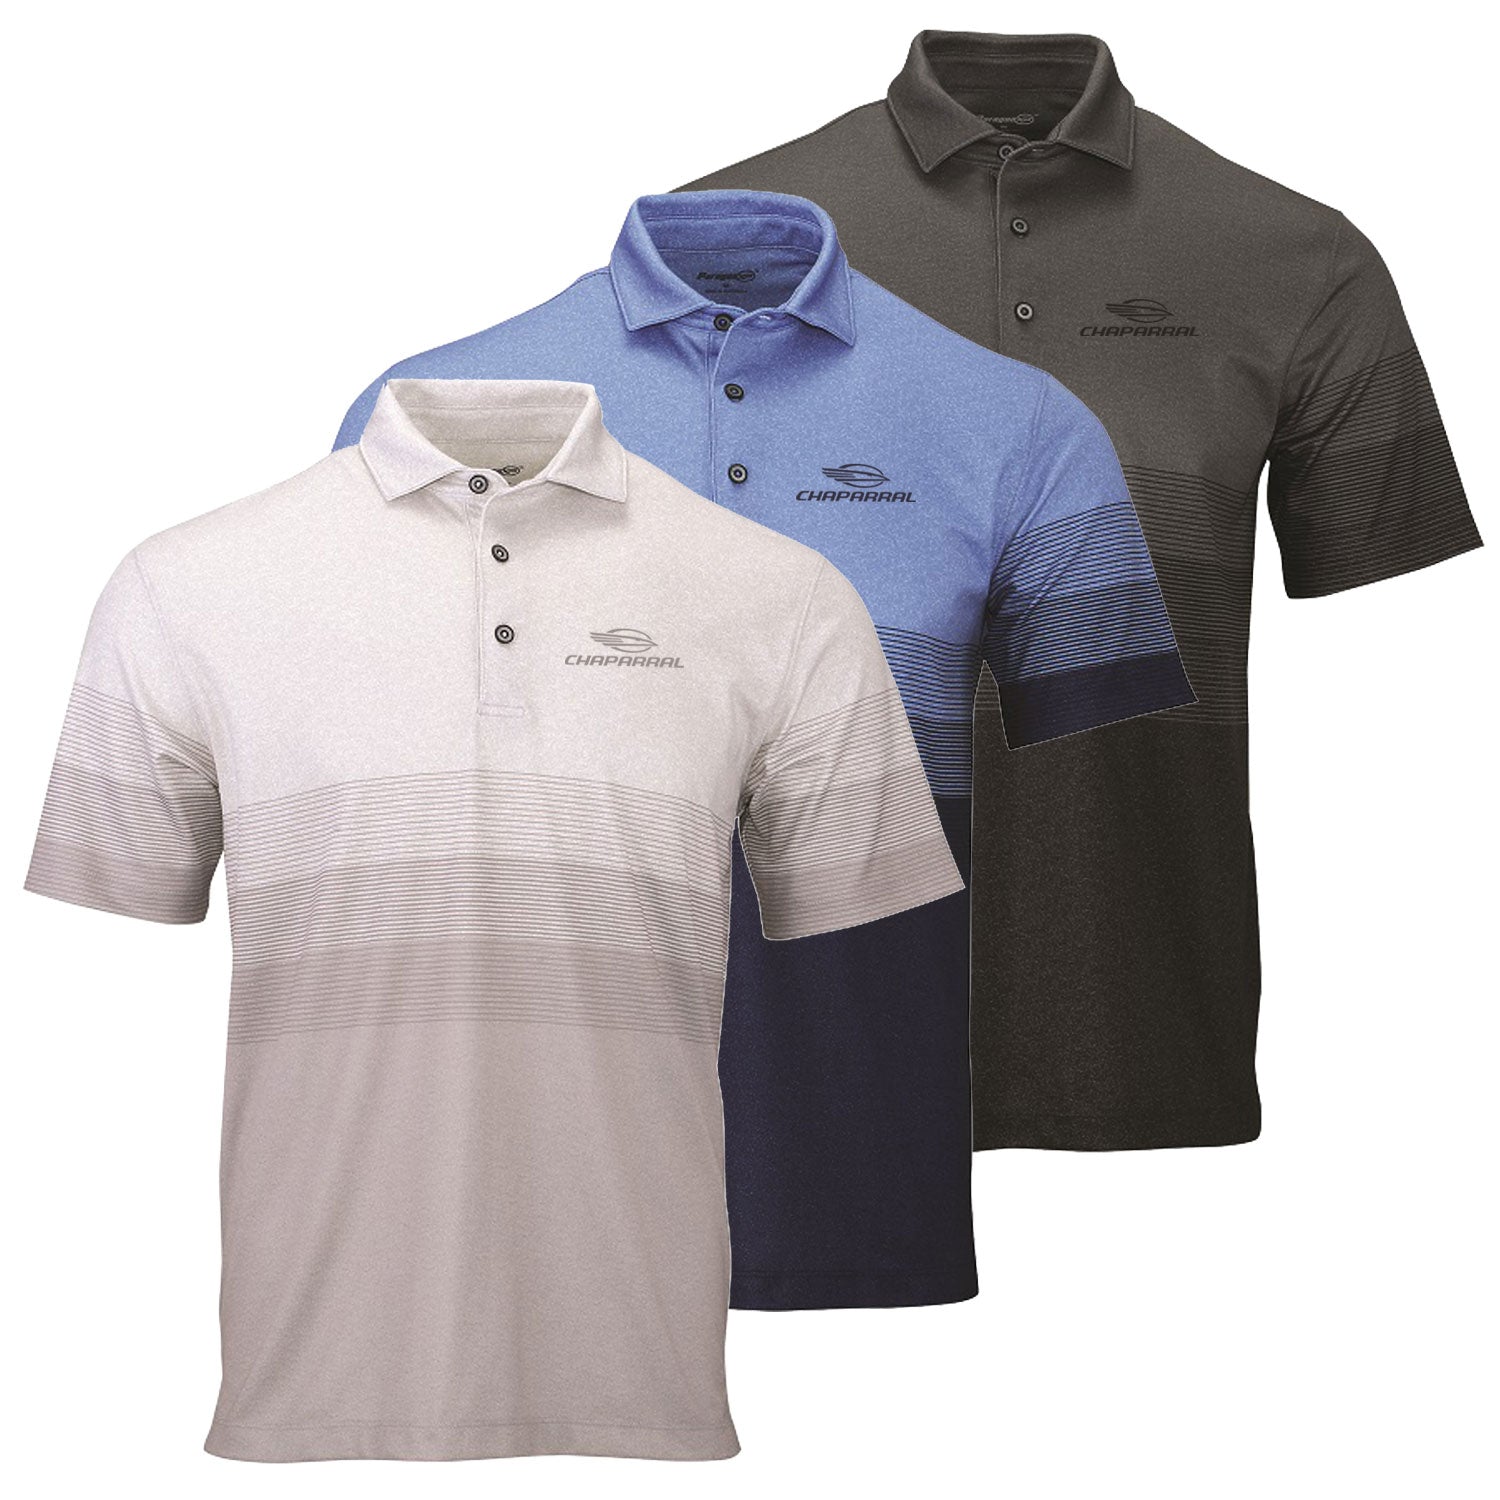 CBS154 Belmont Sublimated Heather Polo – Chaparral Store